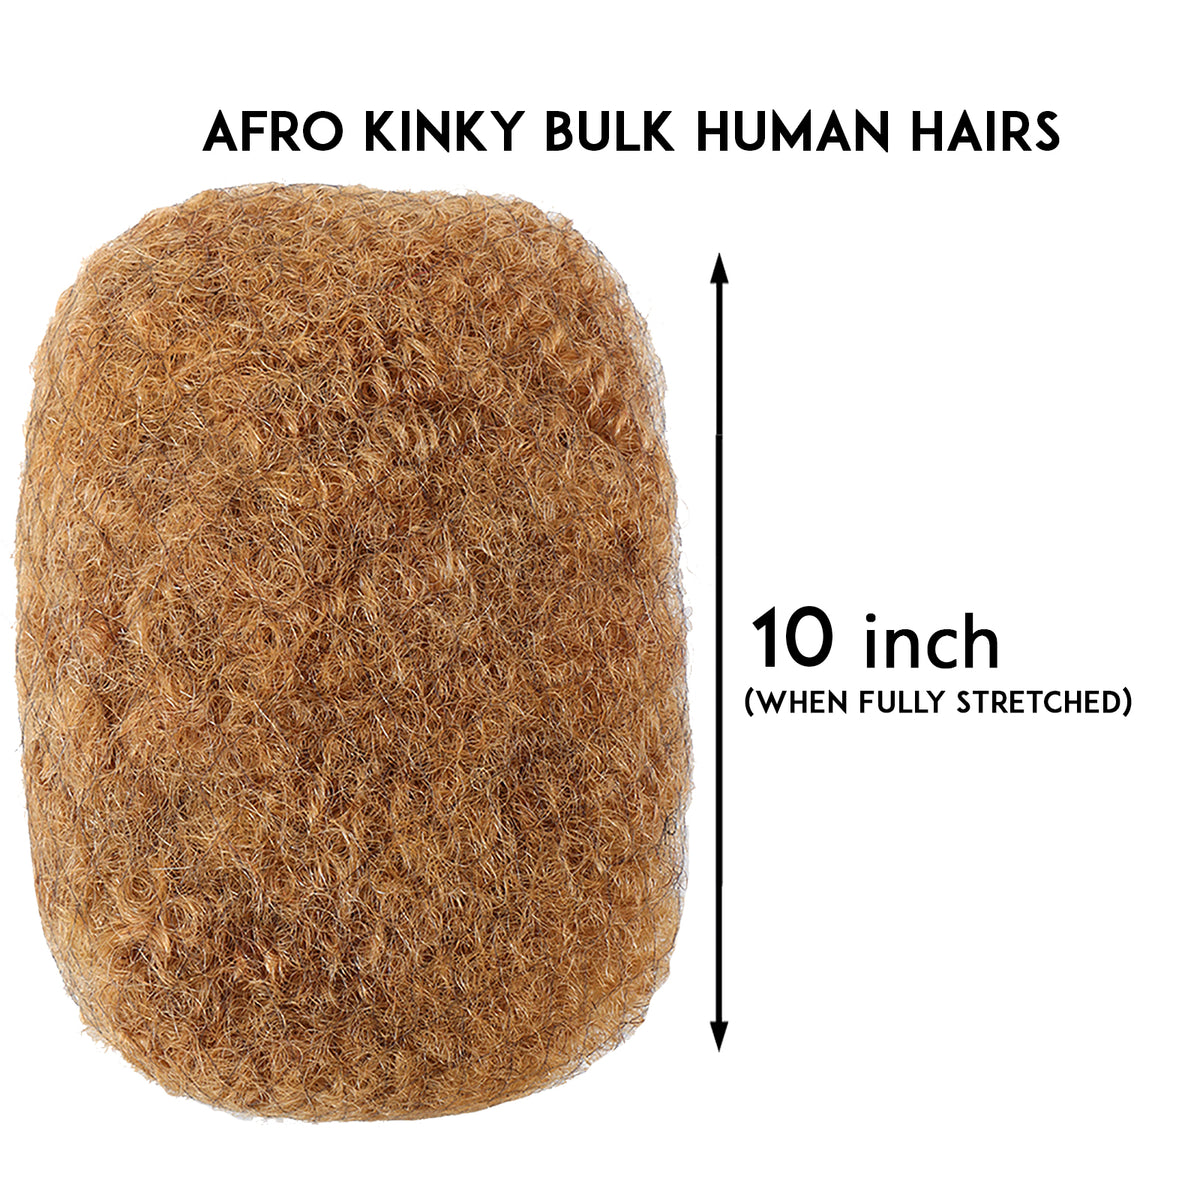 Afro Kinky Human Hairs For Making,Repairing & Bulking Locs 8 Inch Long Afro Kinky Bulk Human Hair For Dreadlock Extensions 100% Natural Afro Hairs For Twisting & Braiding 29g/1Oz (27/ Honey Blonde,8Inch)